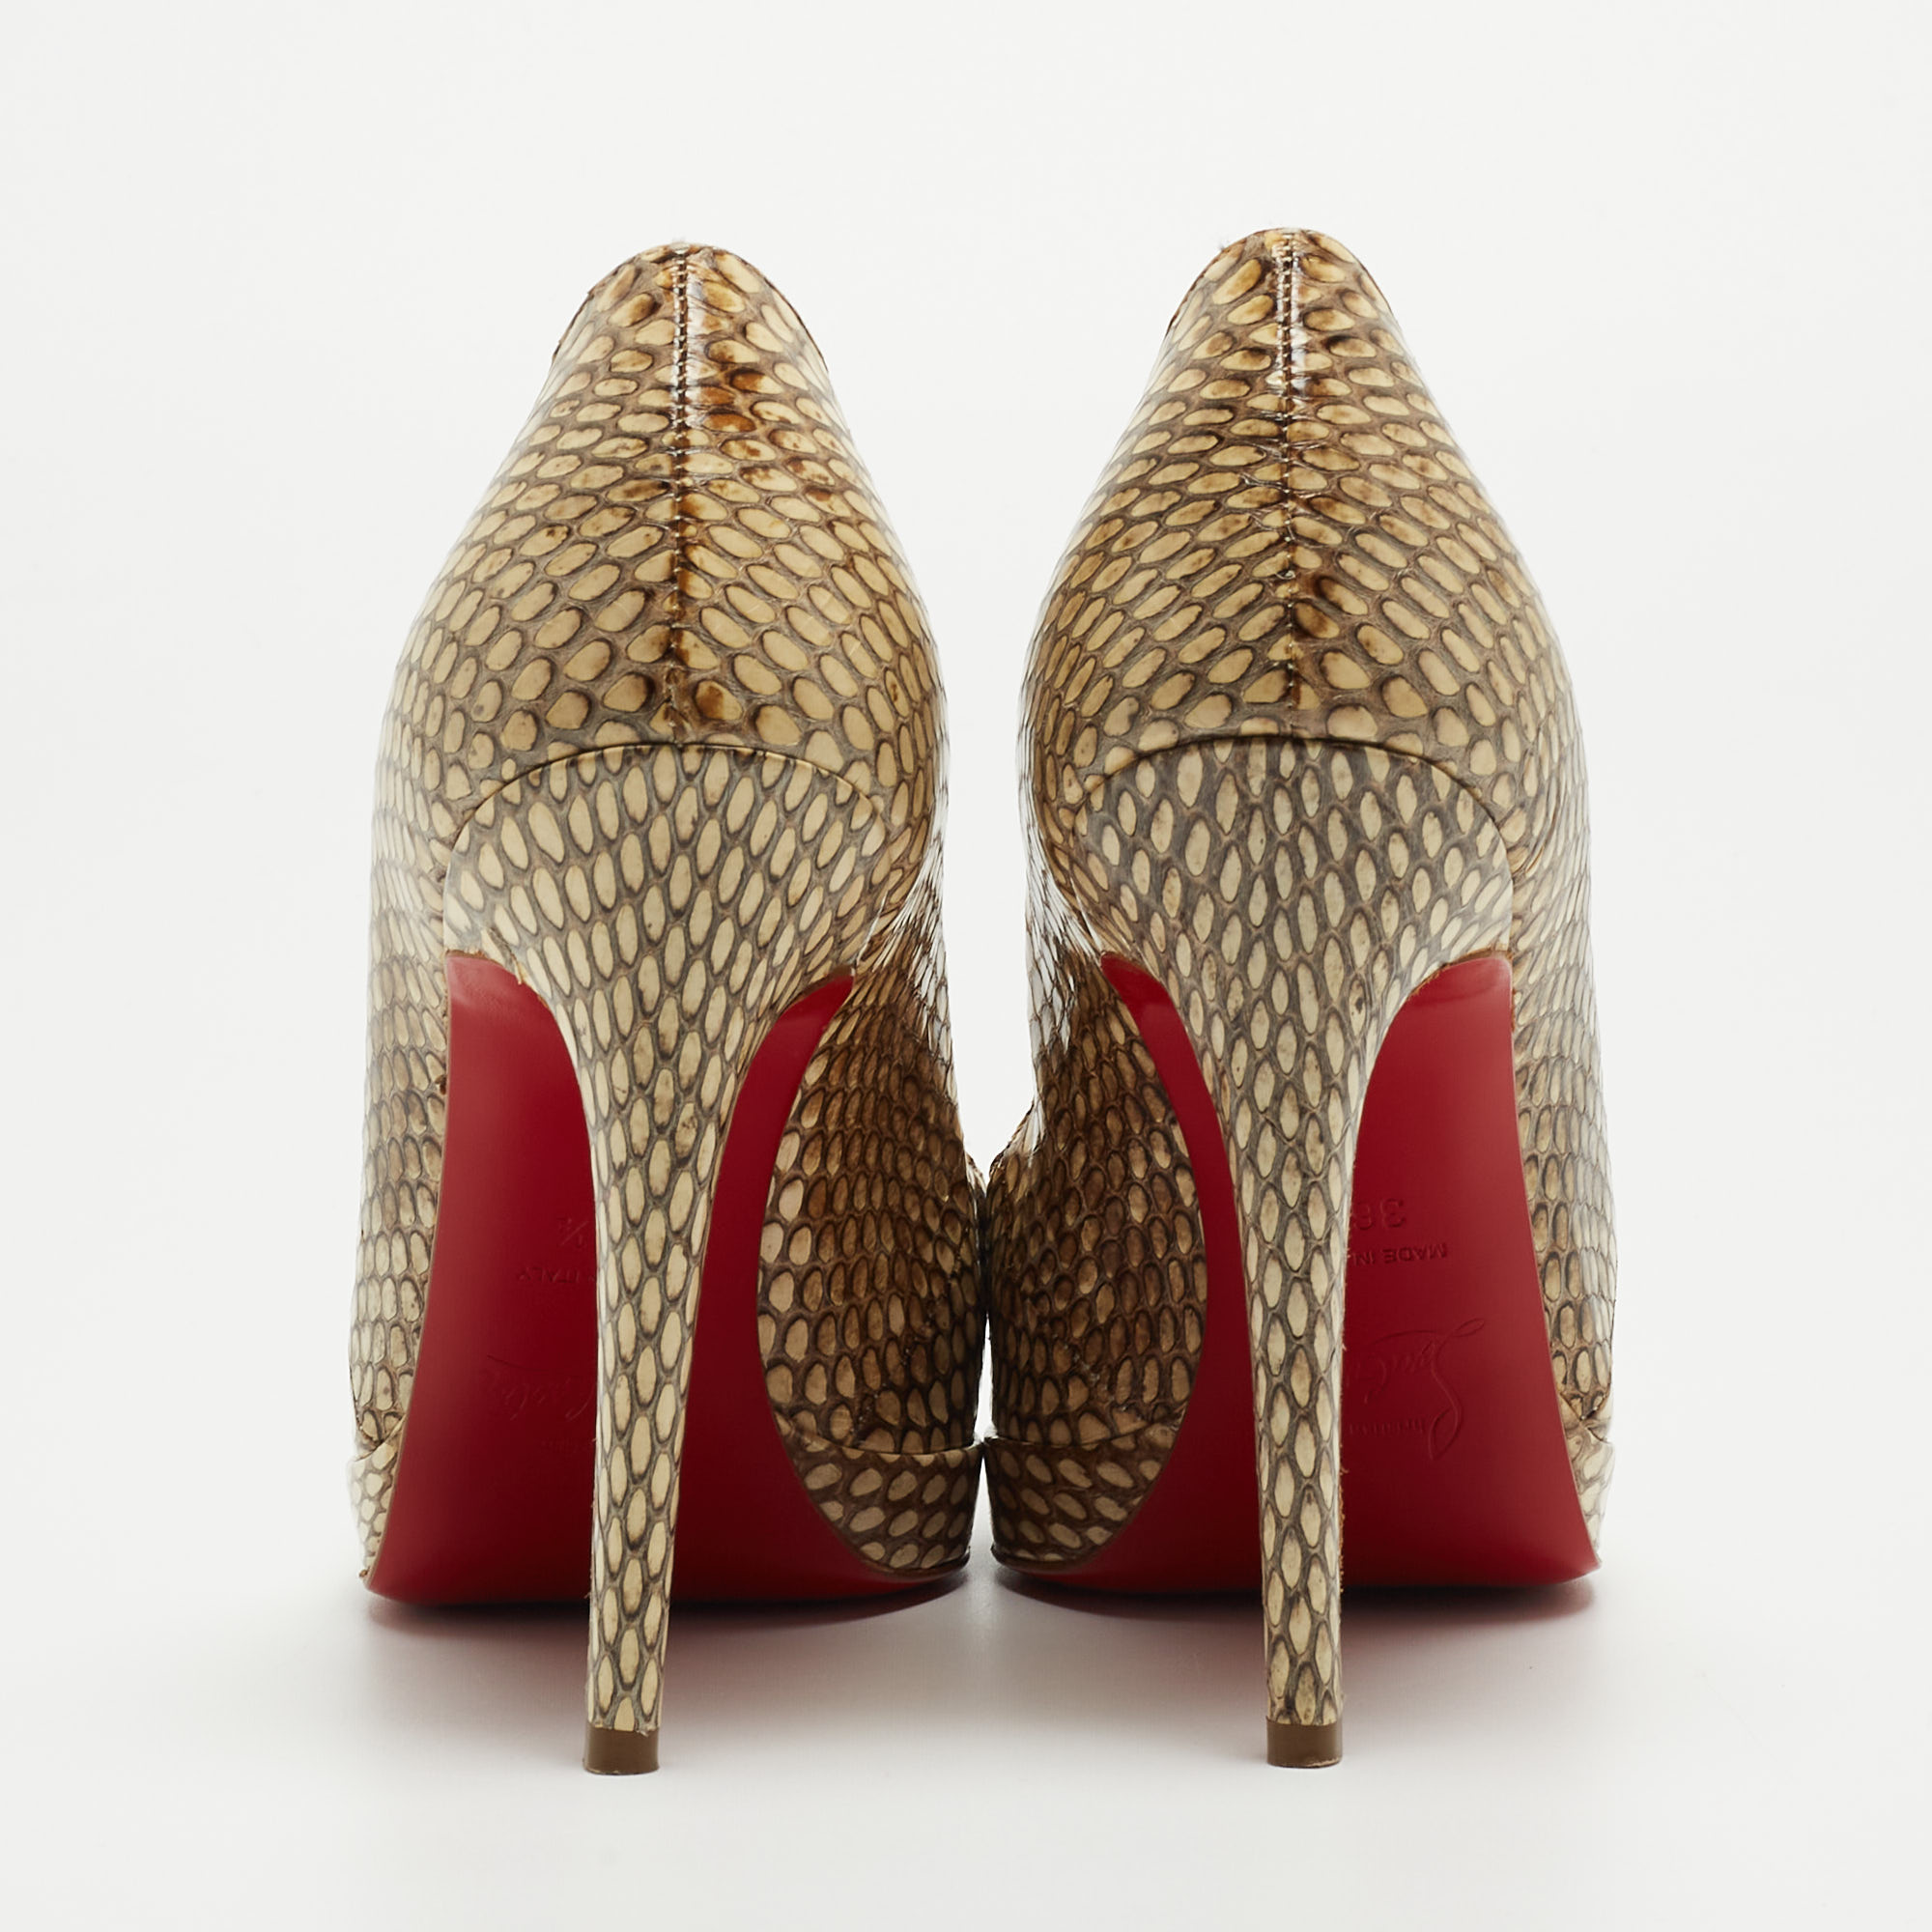 Christian Louboutin Beige Python Leather New Simple Round Toe Pumps Size 36.5